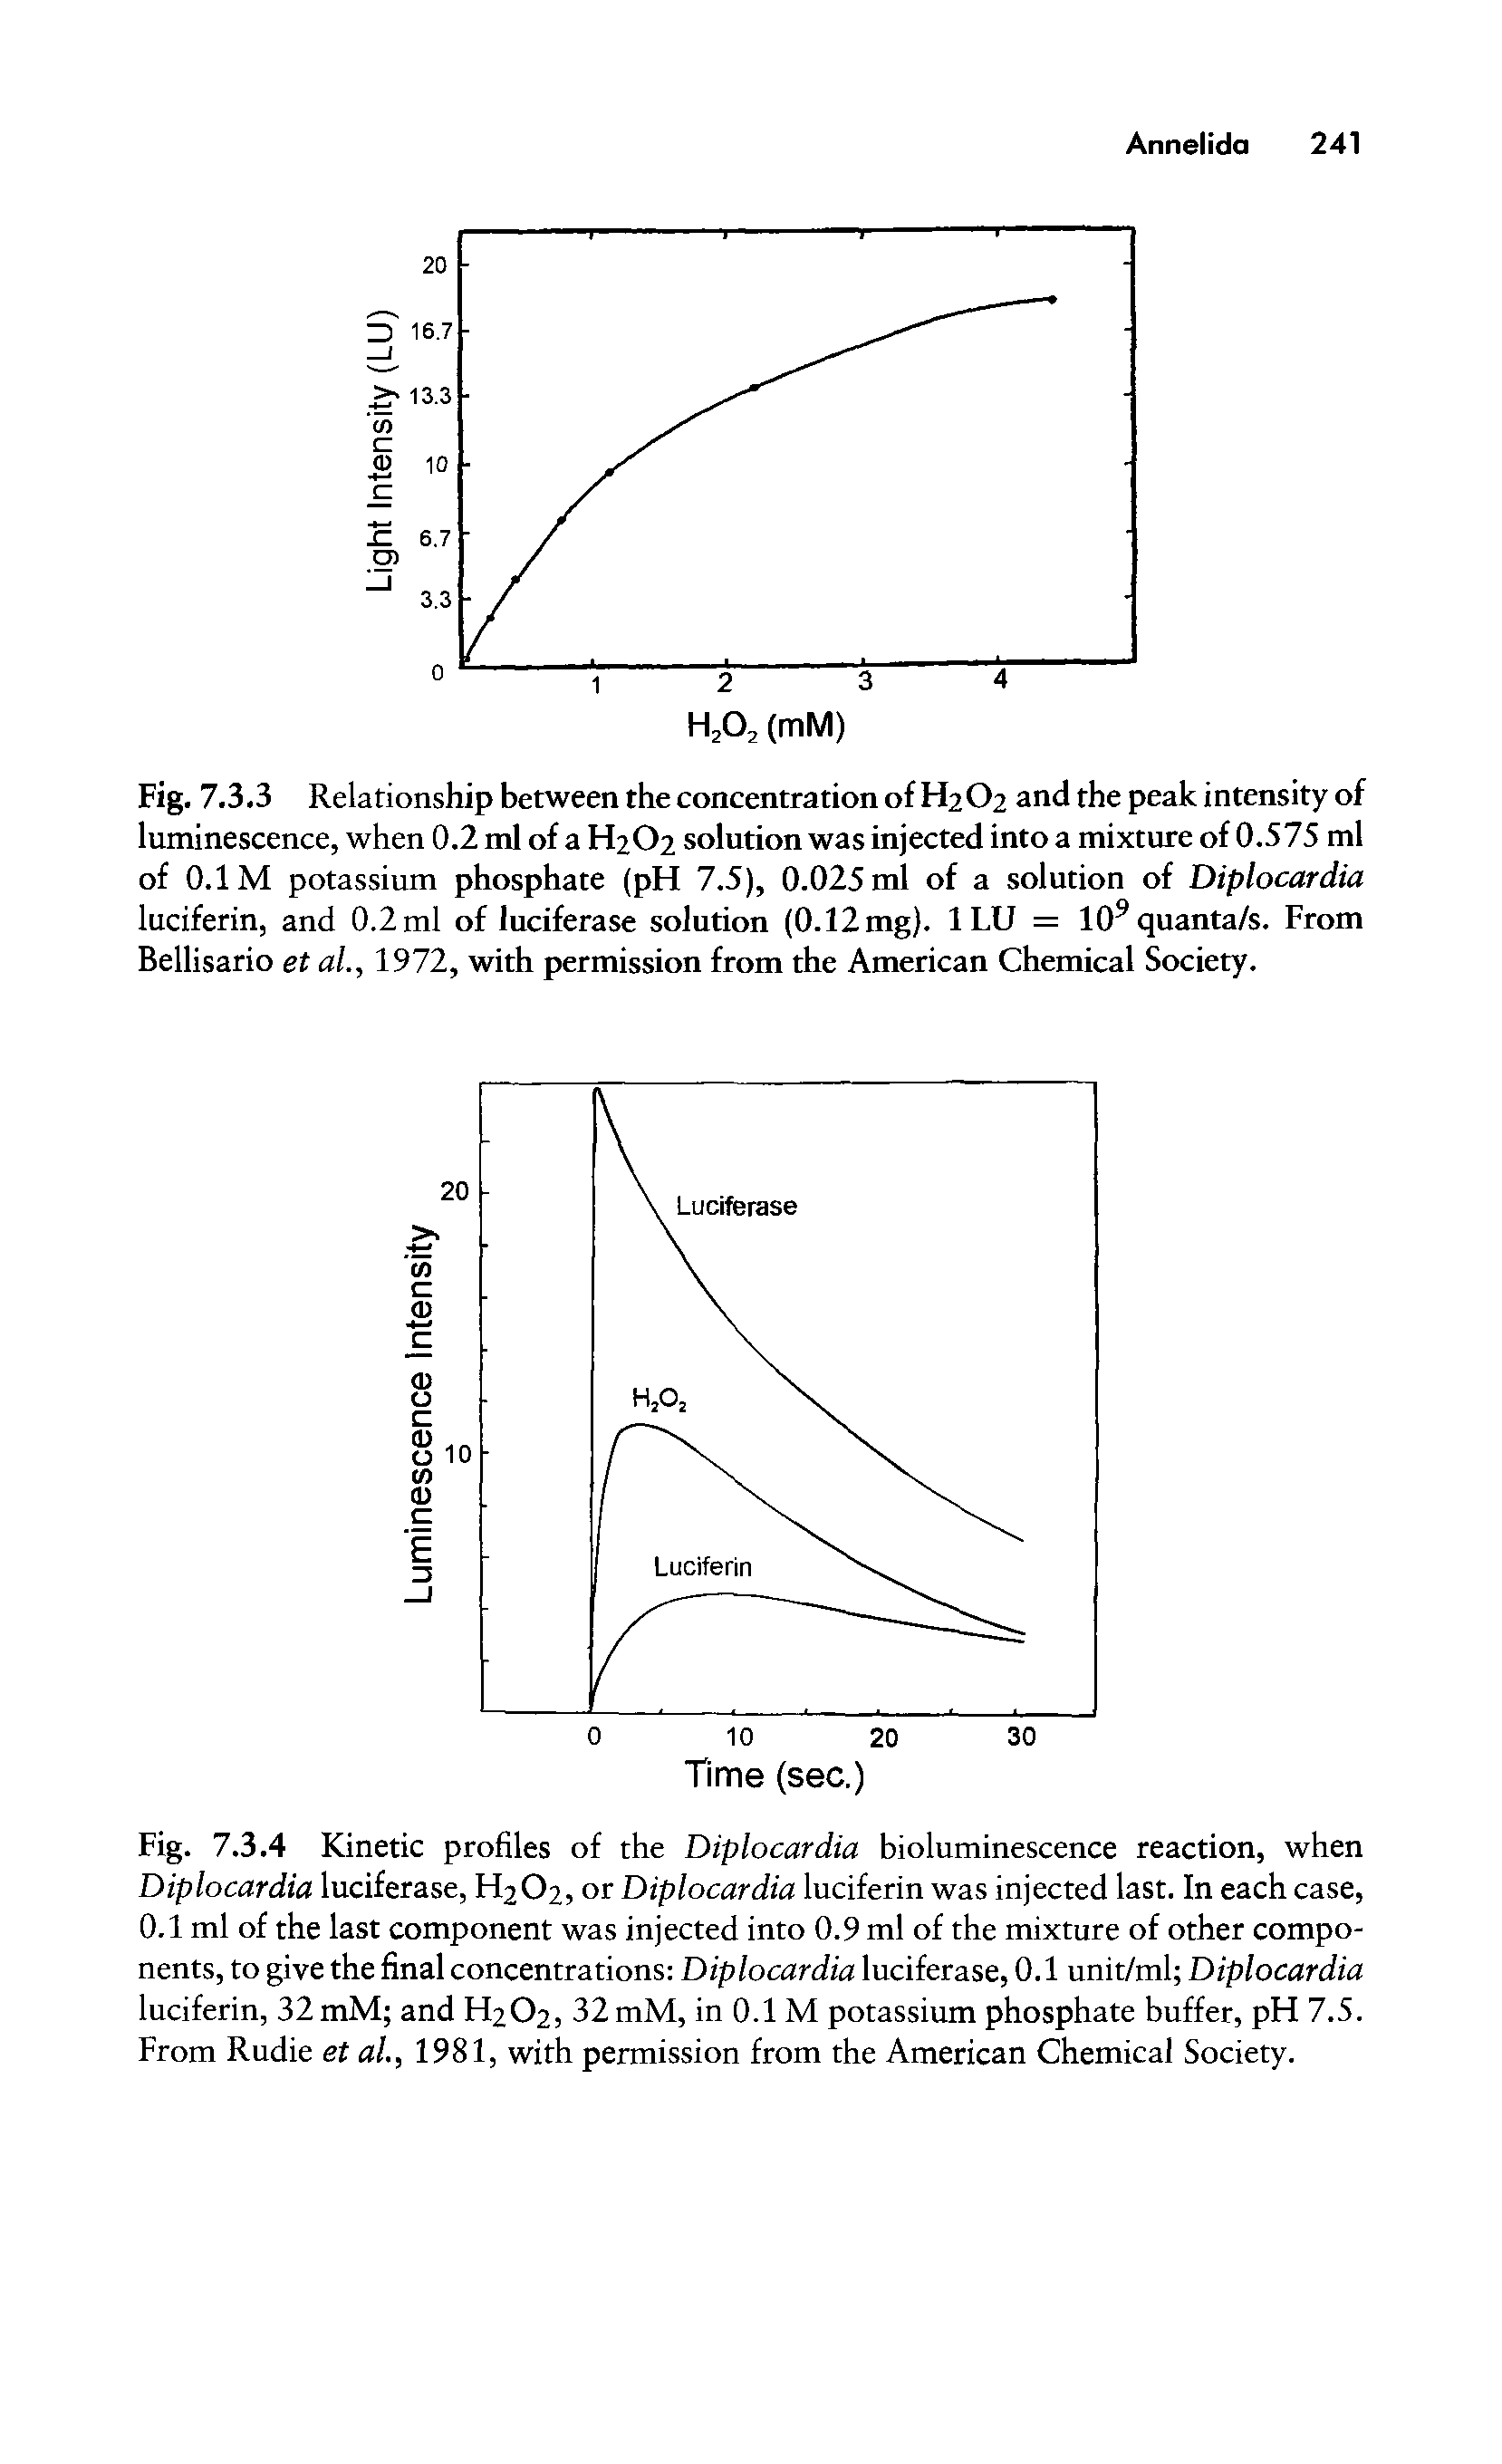 Fig. 7.3.3 Relationship between the concentration of H2O2 and the peak intensity of luminescence, when 0.2 ml of a H2O2 solution was injected into a mixture of 0.575 ml of 0.1 M potassium phosphate (pH 7.5), 0.025 ml of a solution of Diplocardia luciferin, and 0.2 ml of luciferase solution (0.12 mg). 1 LU = 109 quanta/s. From Bellisario et al., 1972, with permission from the American Chemical Society.